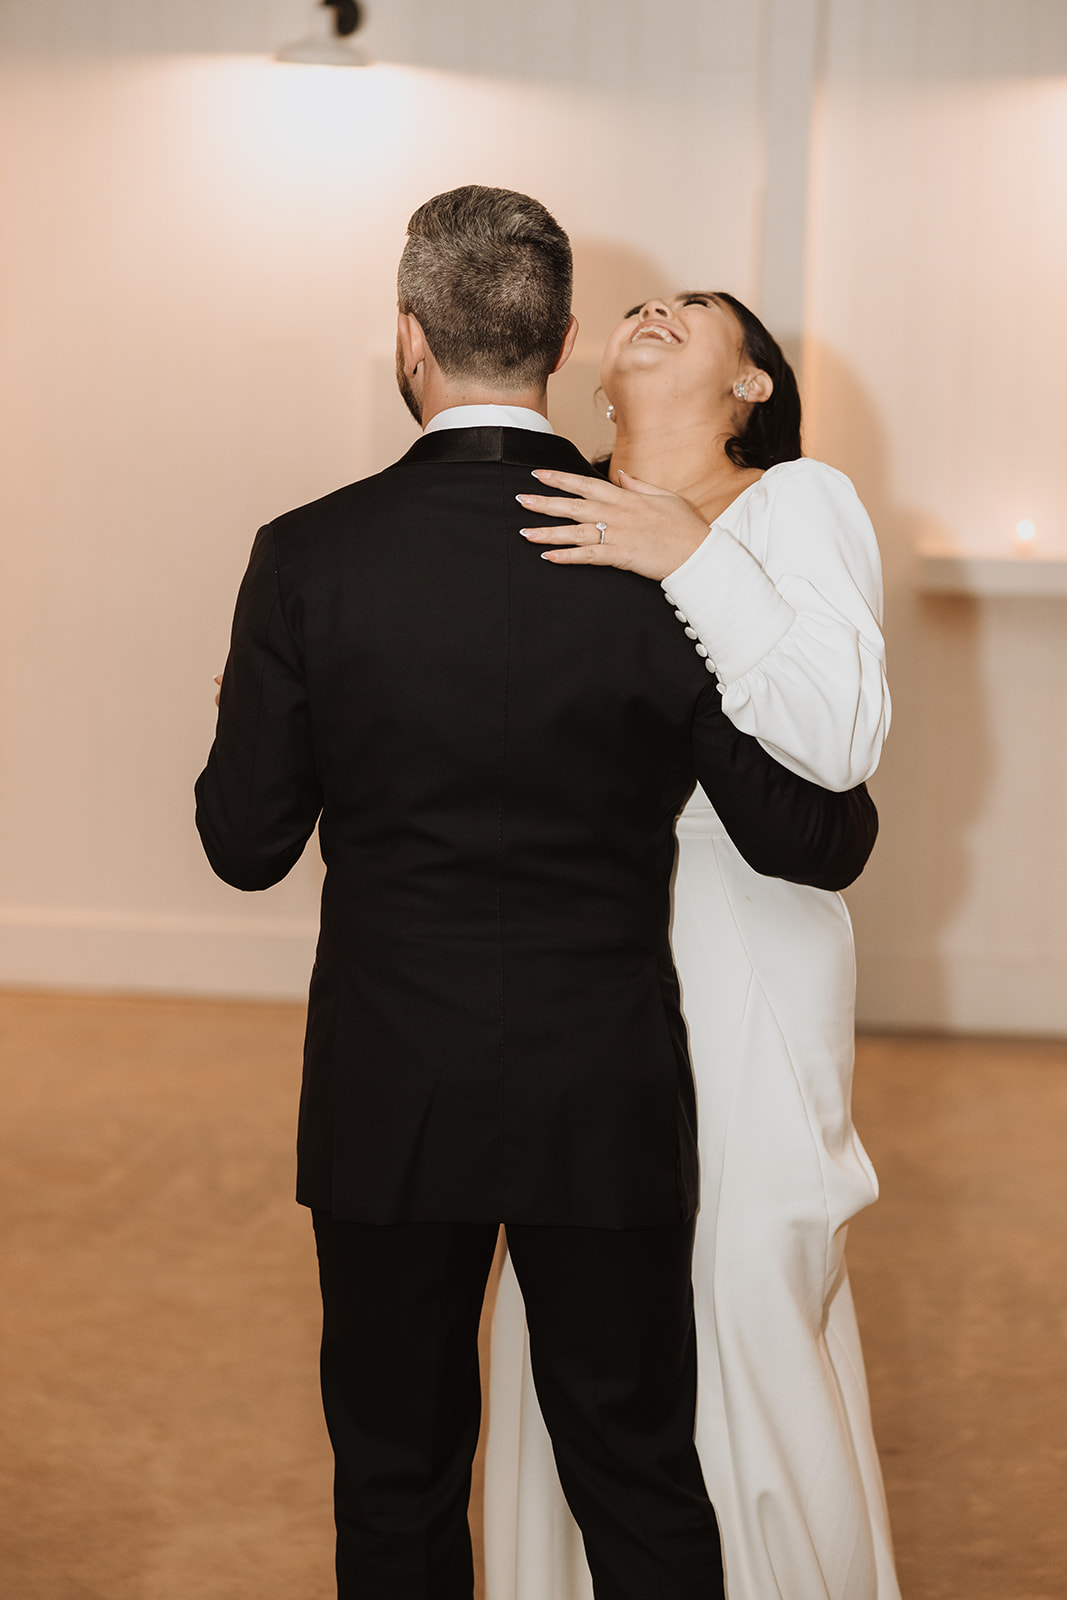 First dance as a married couple at their wedding reception at Seacliff House